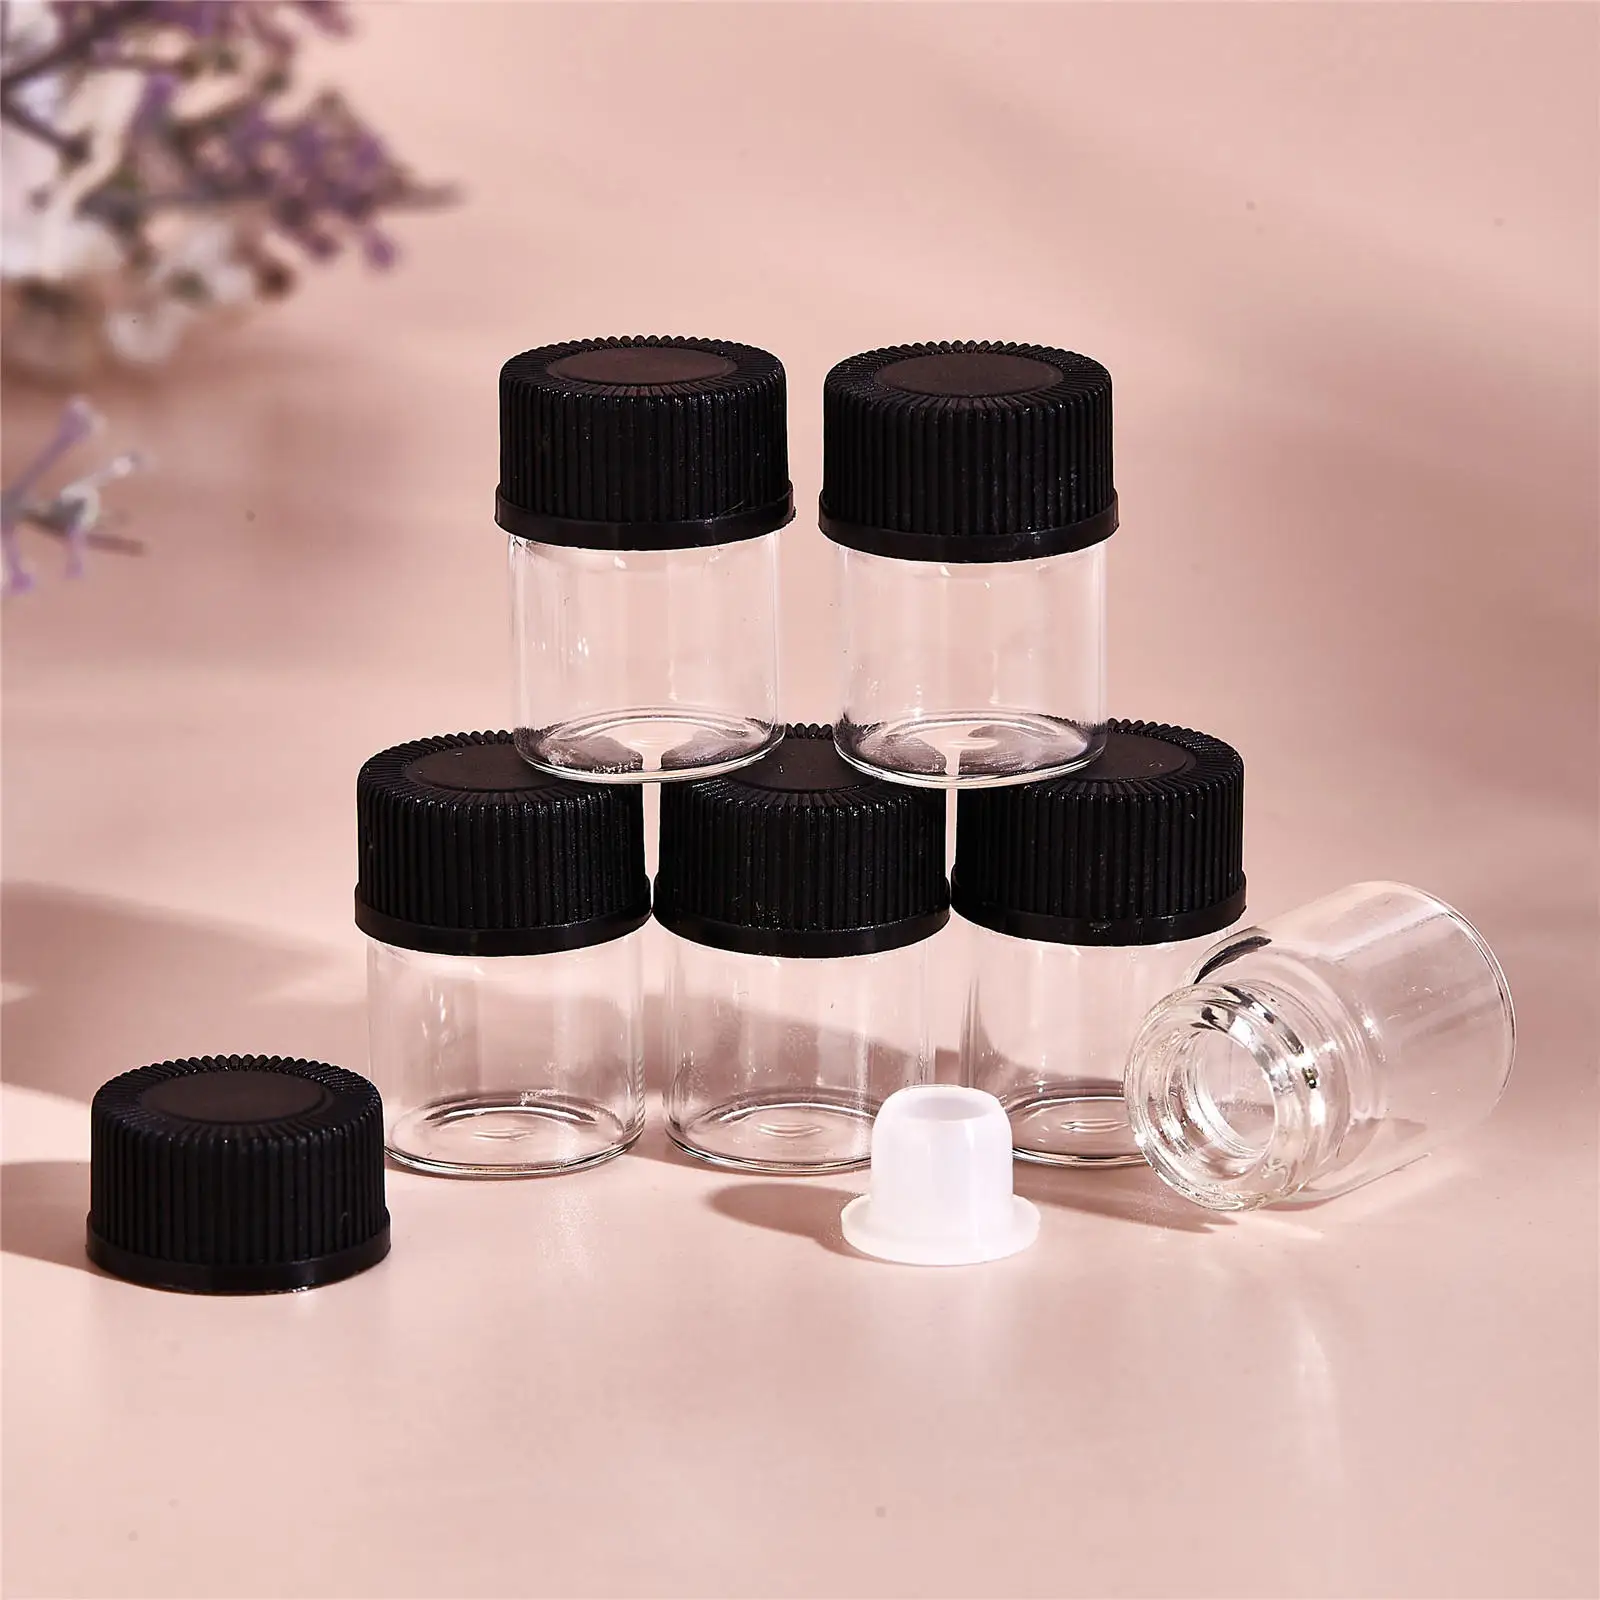 100Pcs Essential Oil Bottles Refillable with Orifice Reducers for Massage